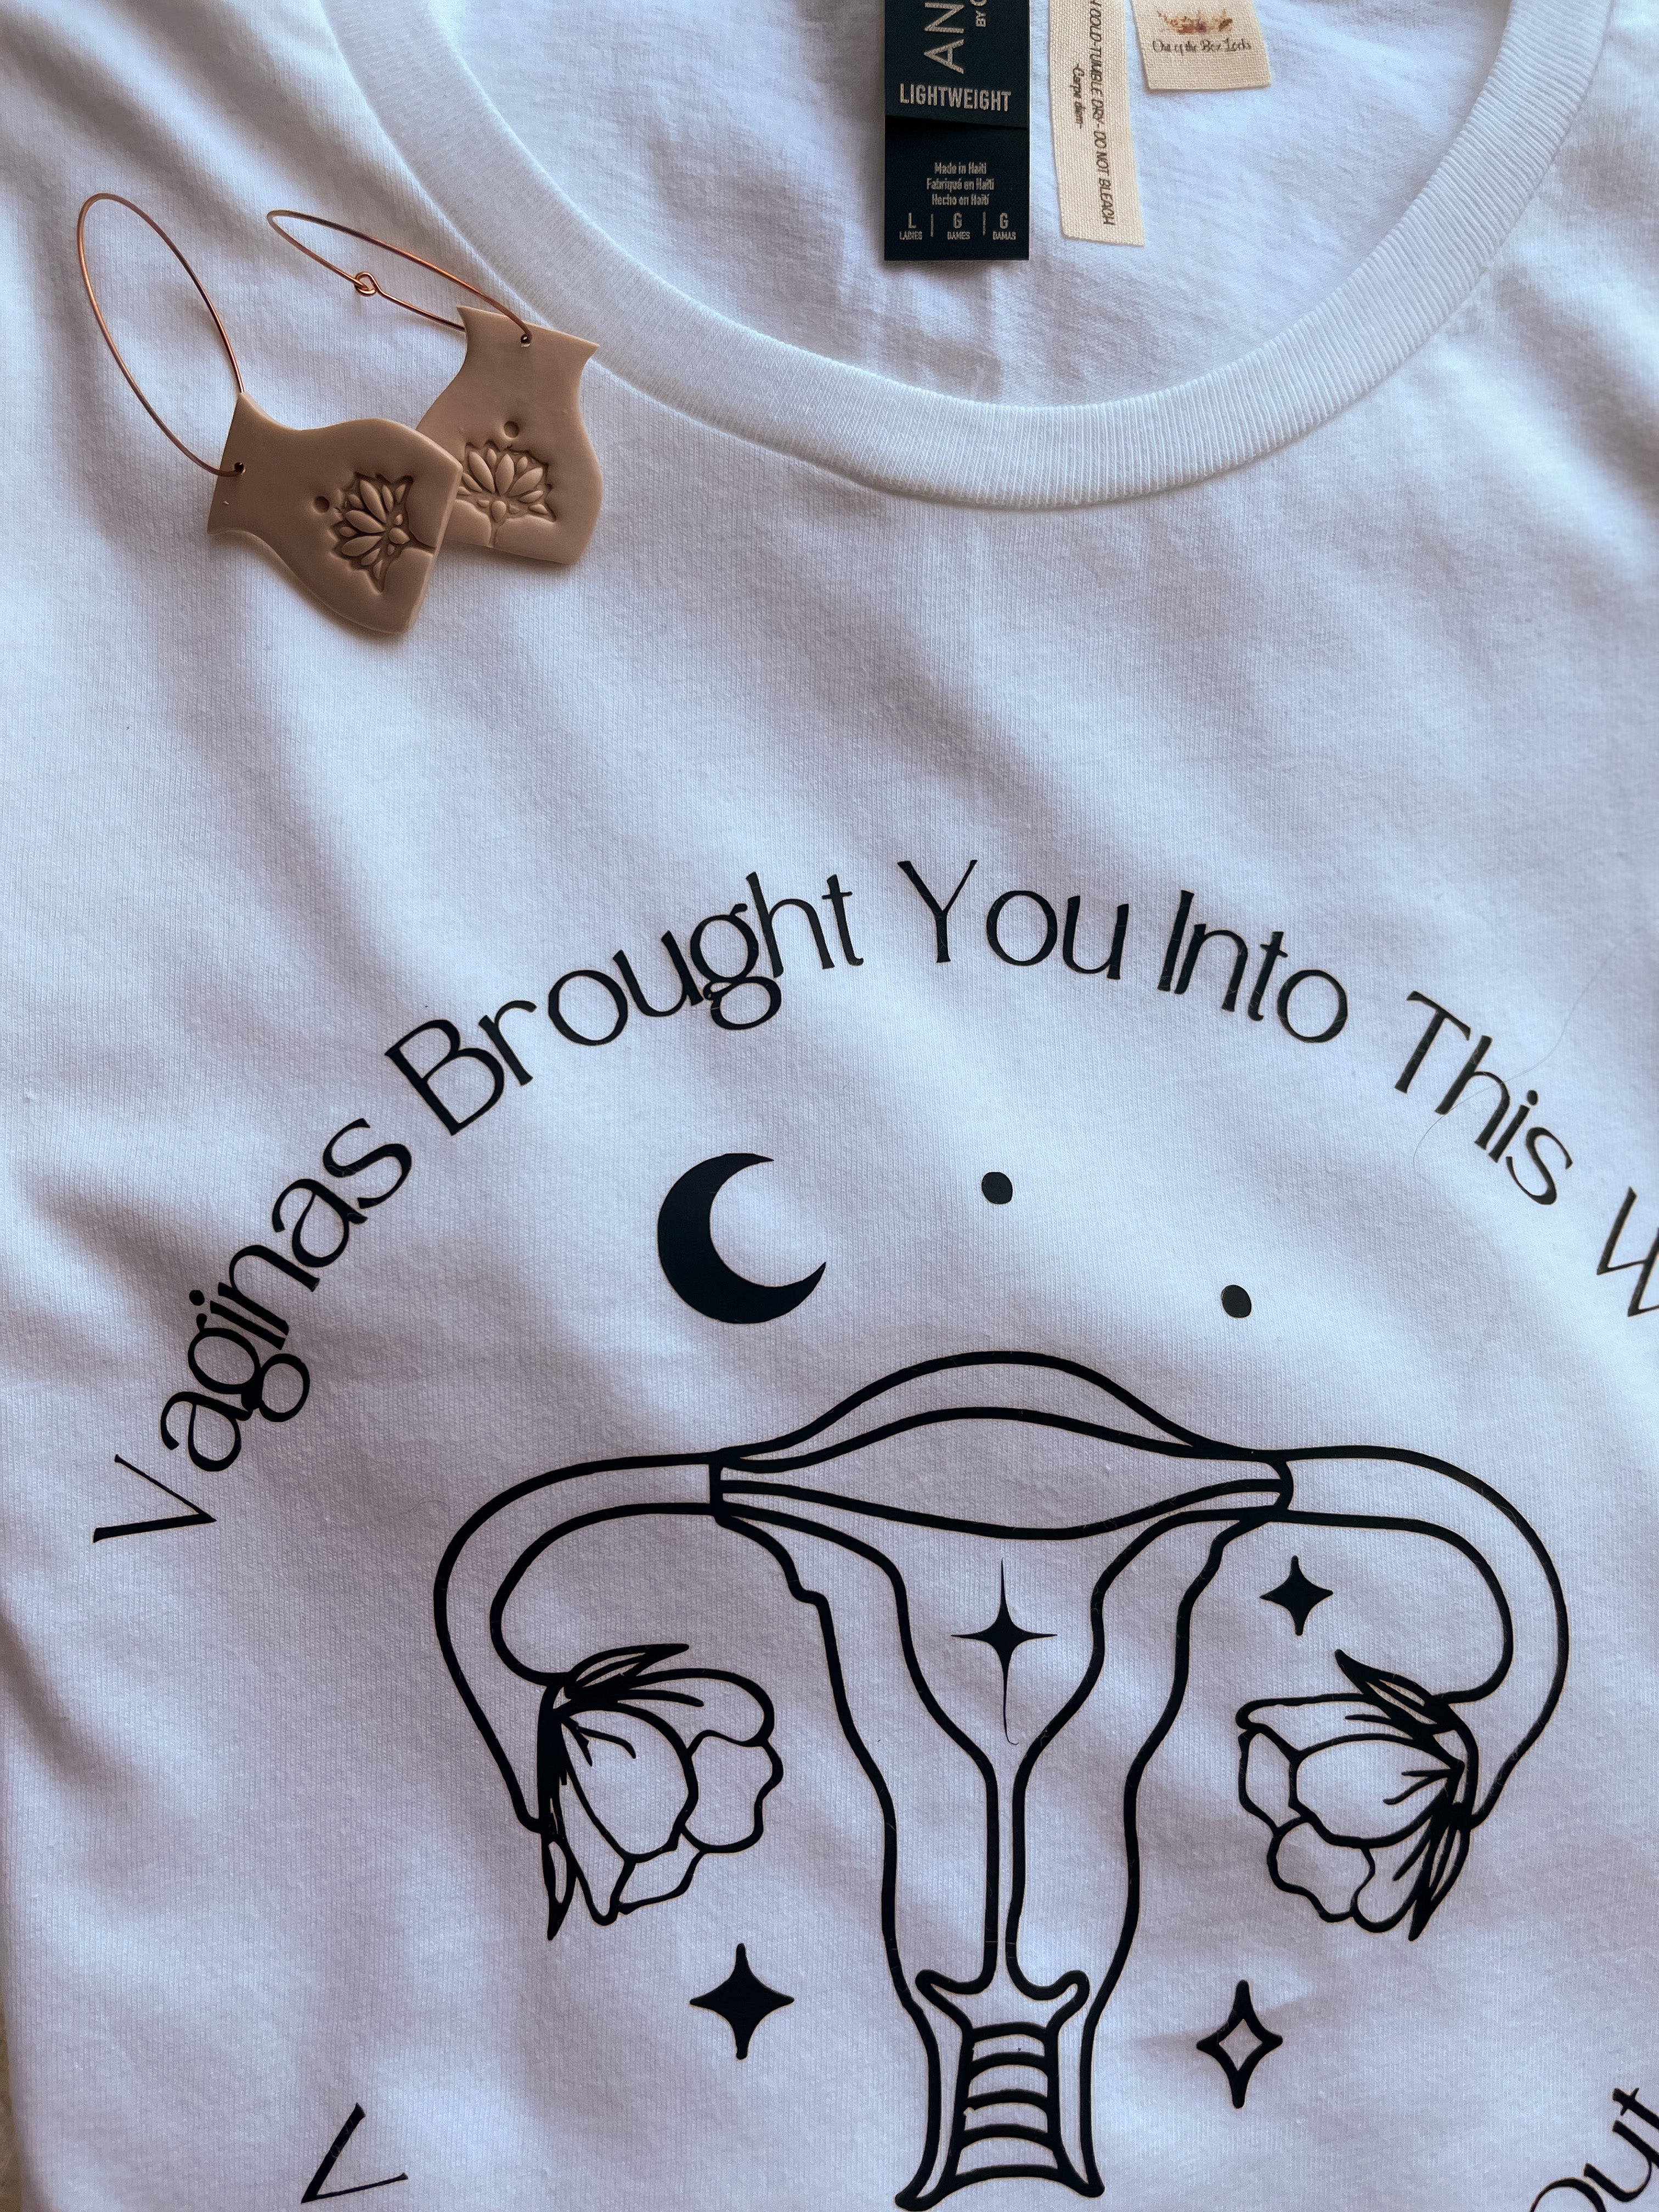 Vaginas Brought You Into This World Vaginas Will Vote You Out (Tee)